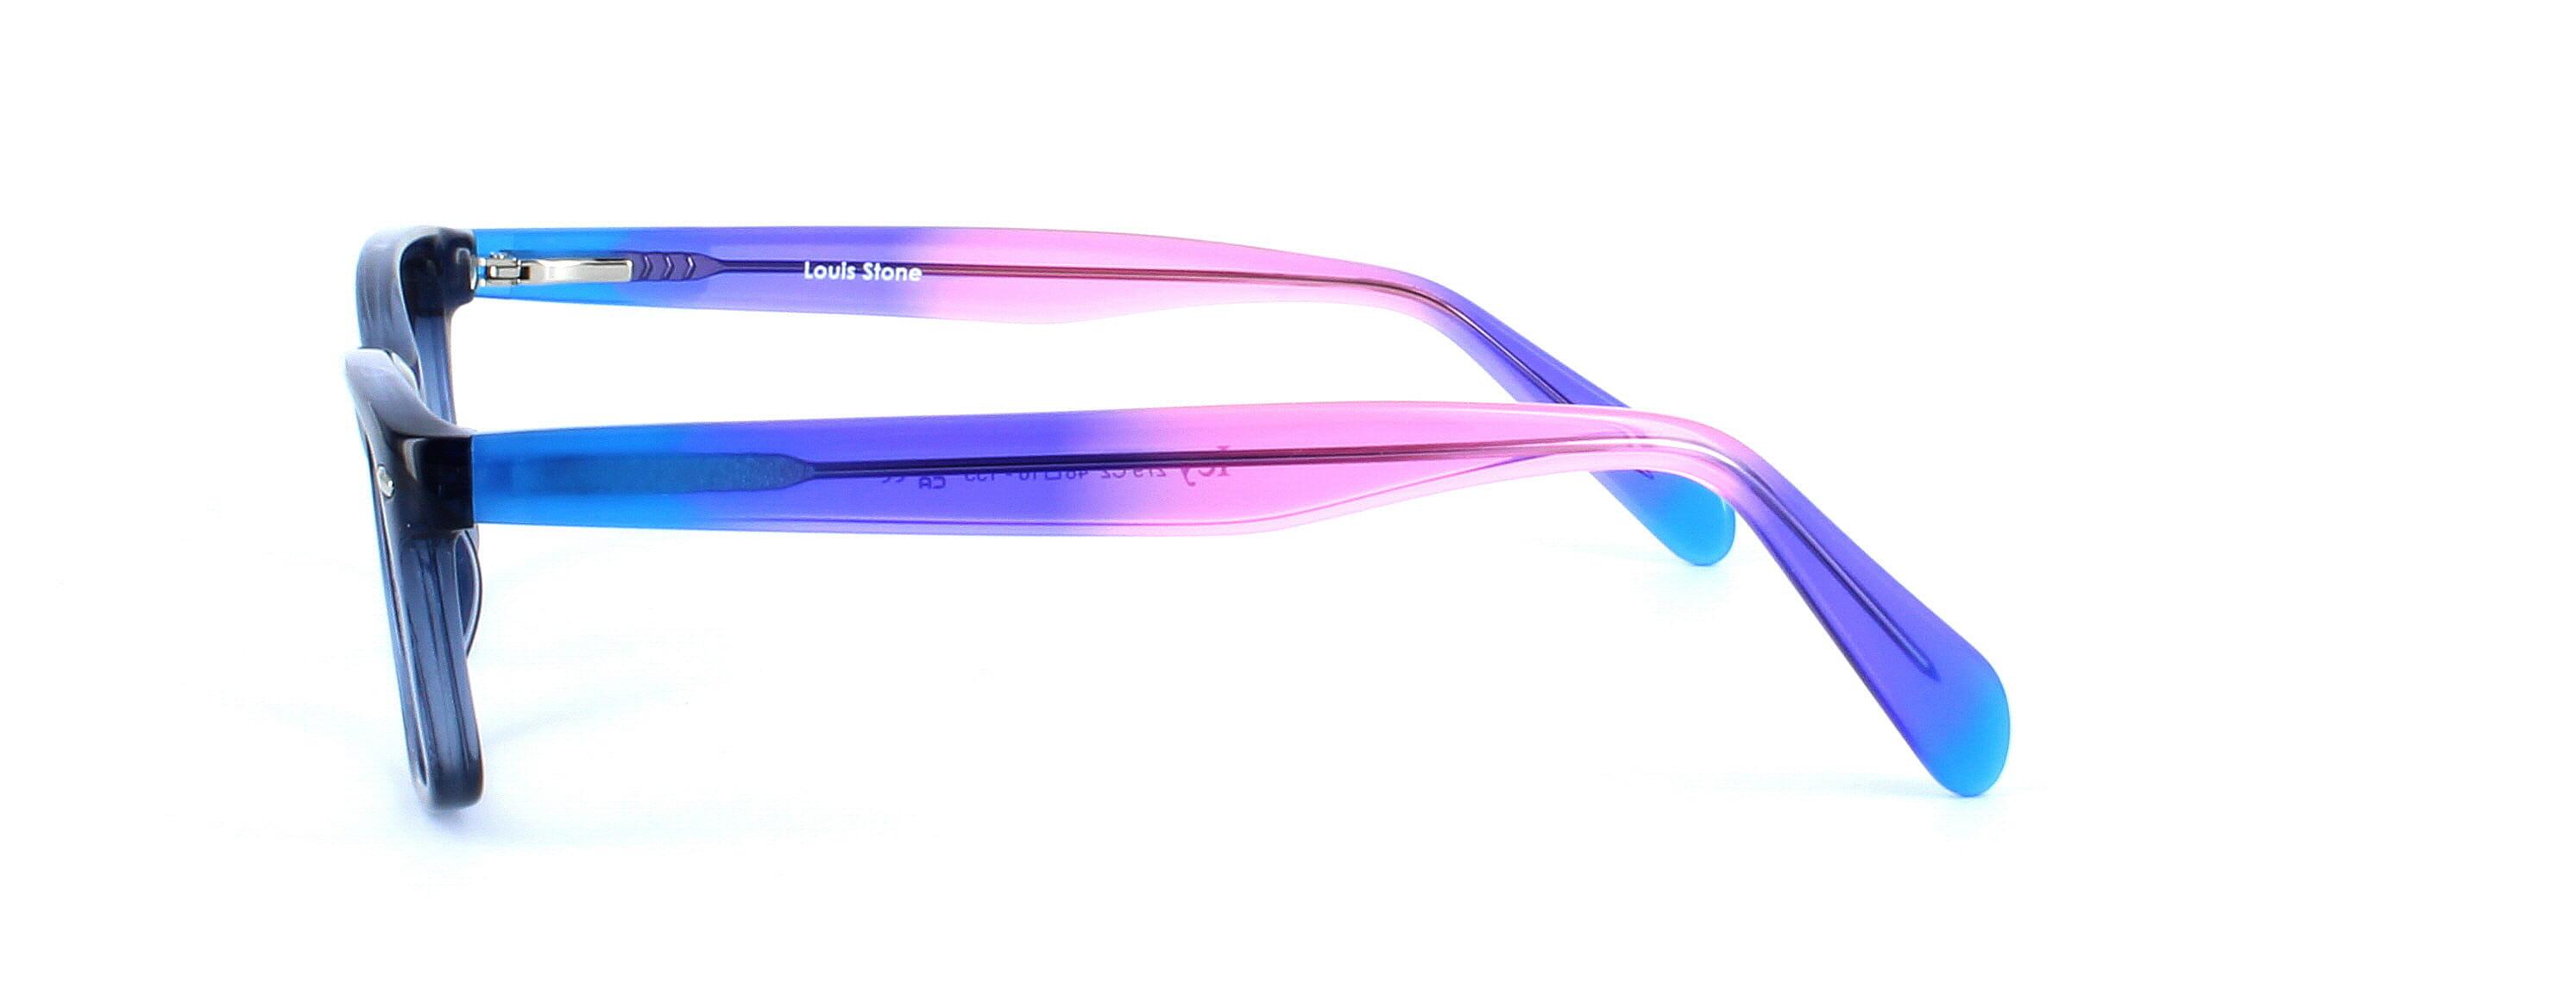 Liguria - Blue - Women's petite acetate glasses frame in blue with multi-coloured arms - image view 3